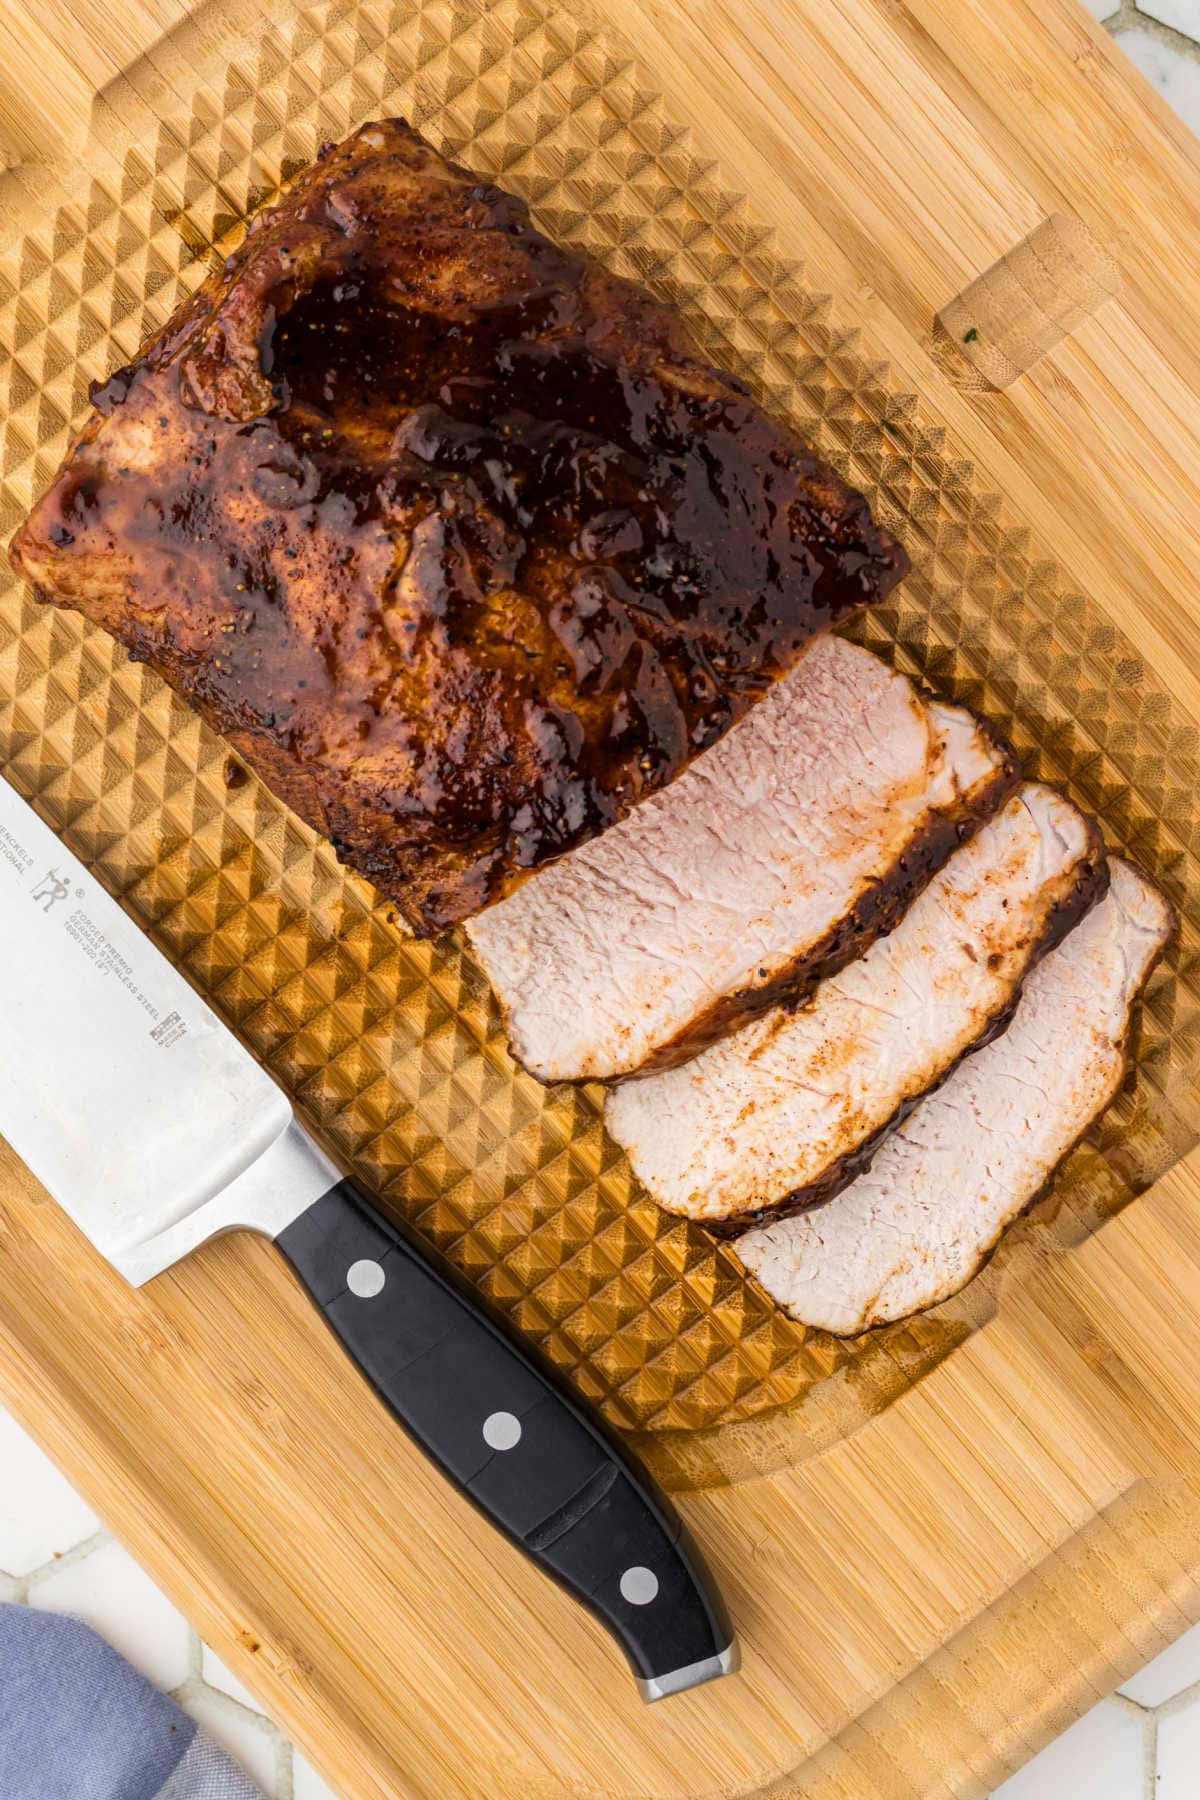 Overhead view of the pork loin sliced on a cutting board with a knife next to it.